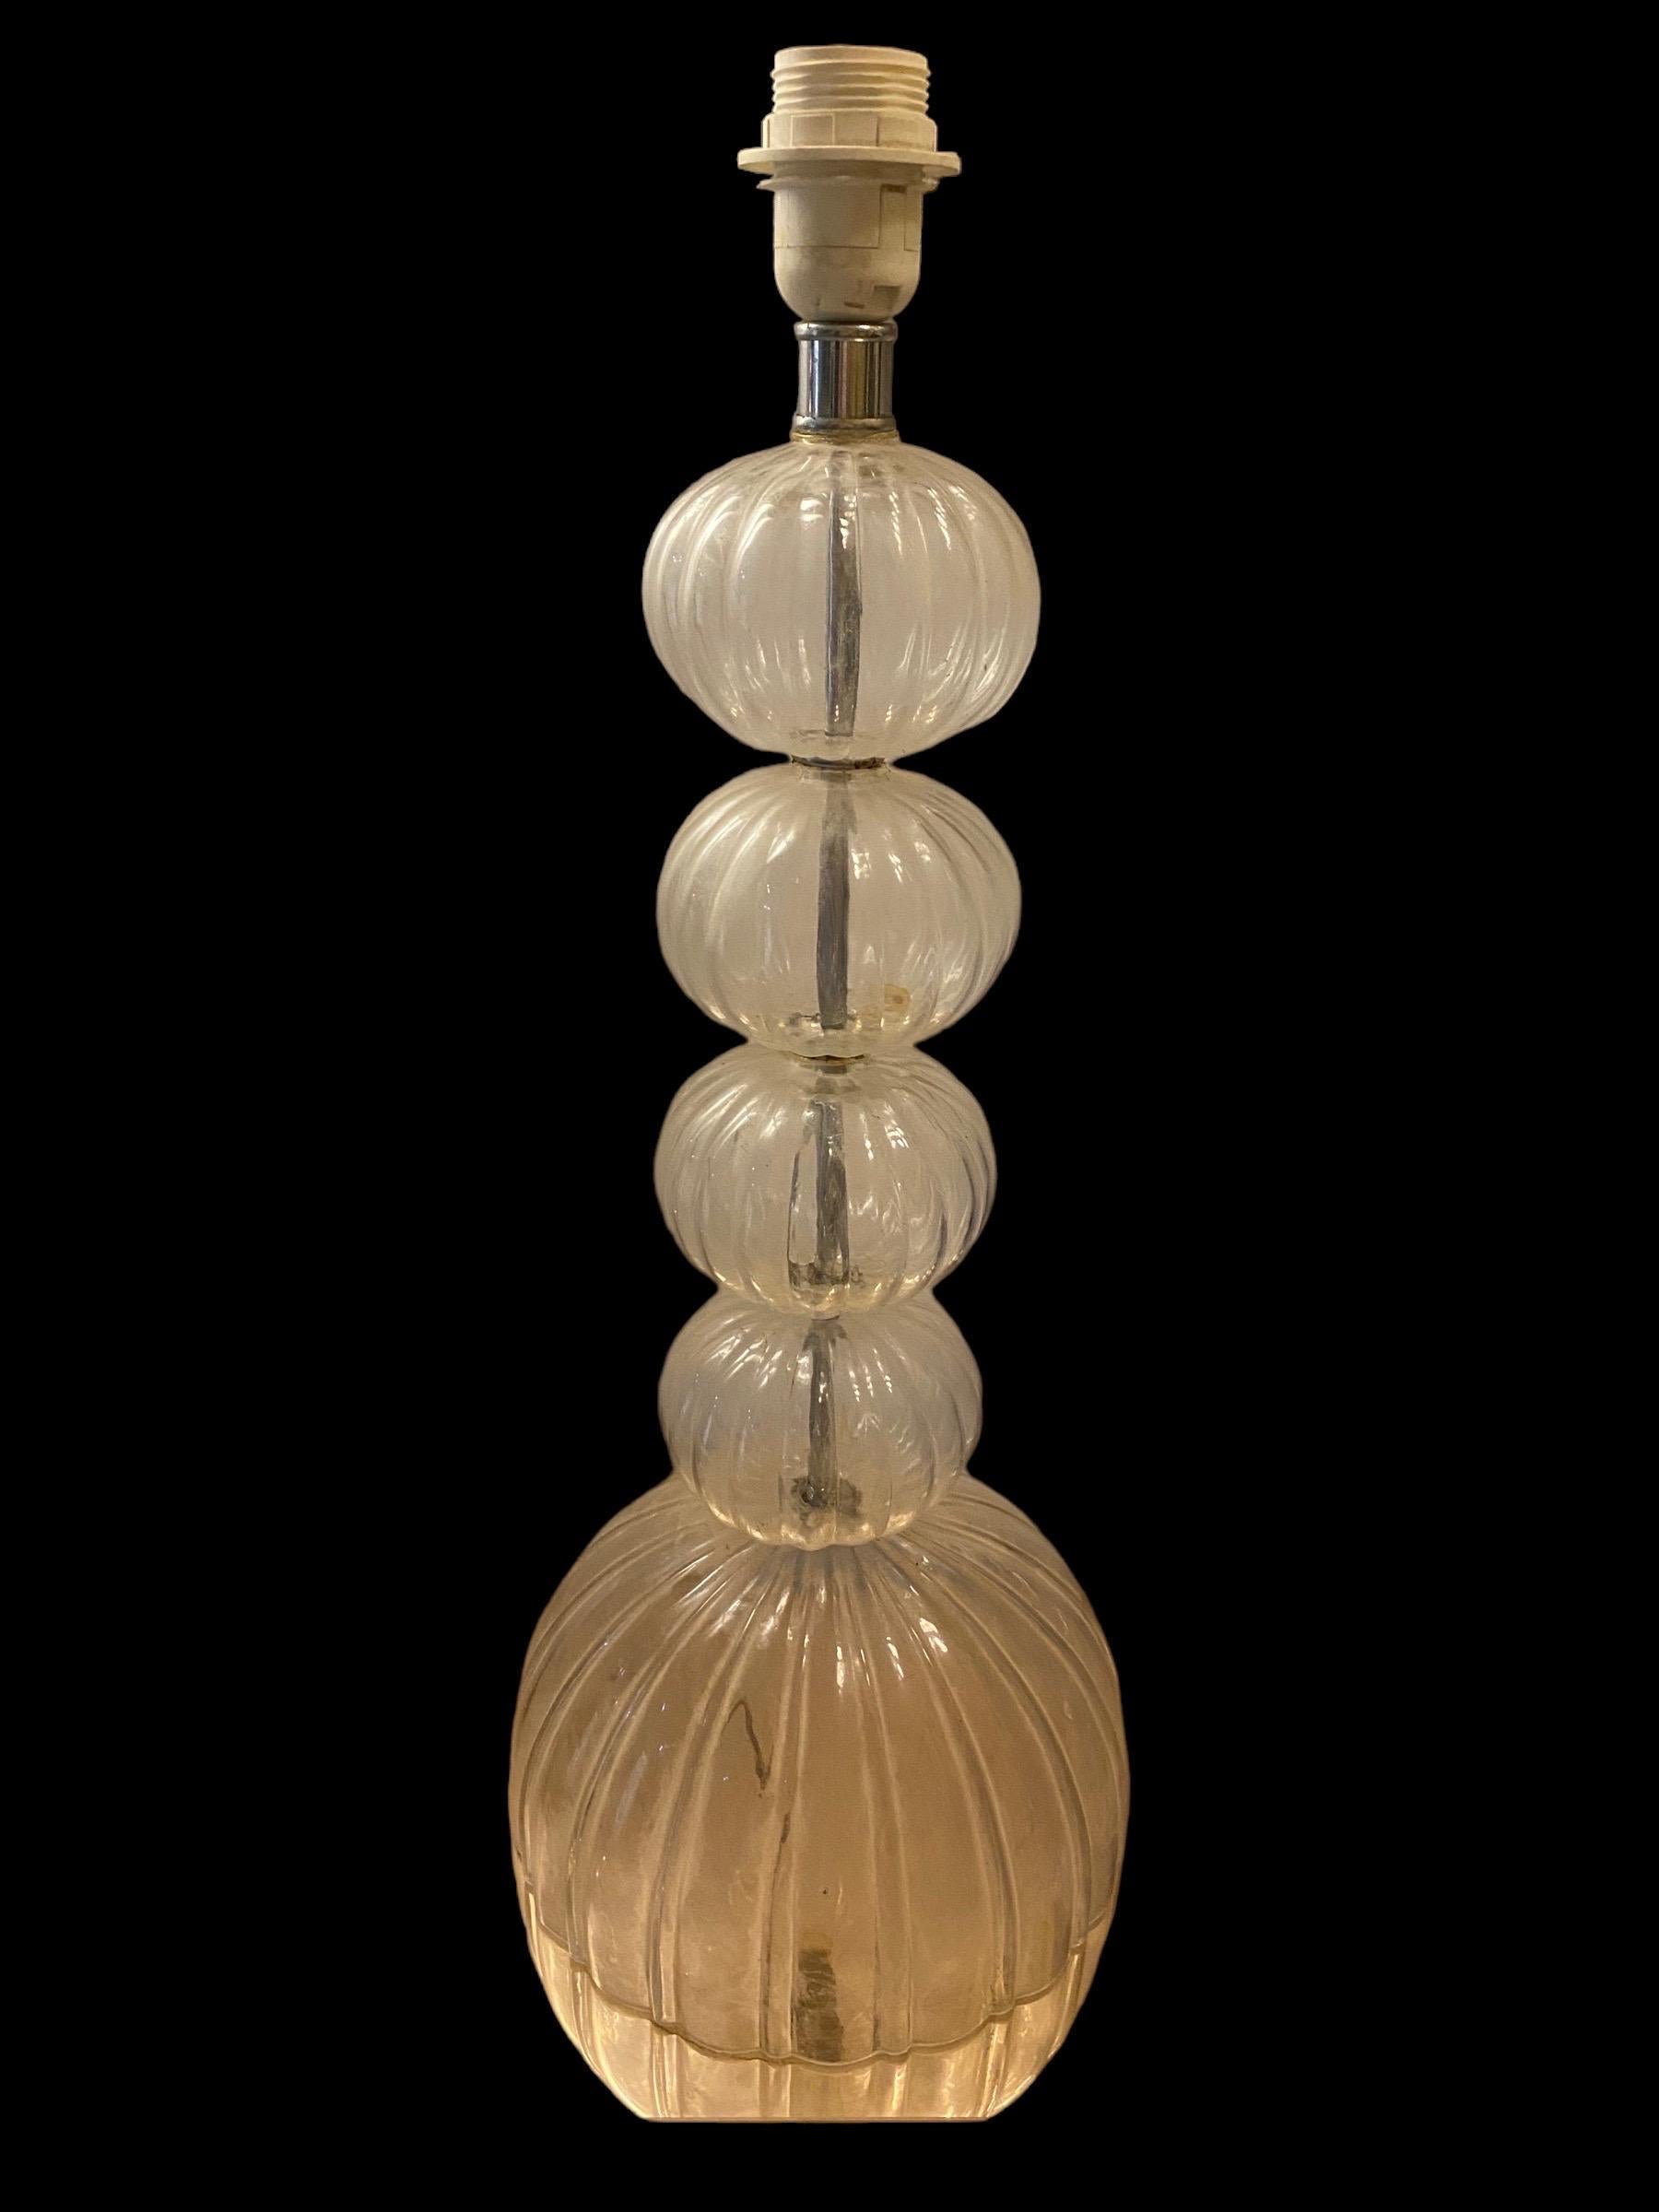 Superb wall lamp by Seguso , high quality glass execution and a very beautiful design. 

Buying a Seguso Murano table lamp can be a worthwhile investment for several reasons:

Artistic Beauty: Seguso Murano lamps are handcrafted by skilled artisans